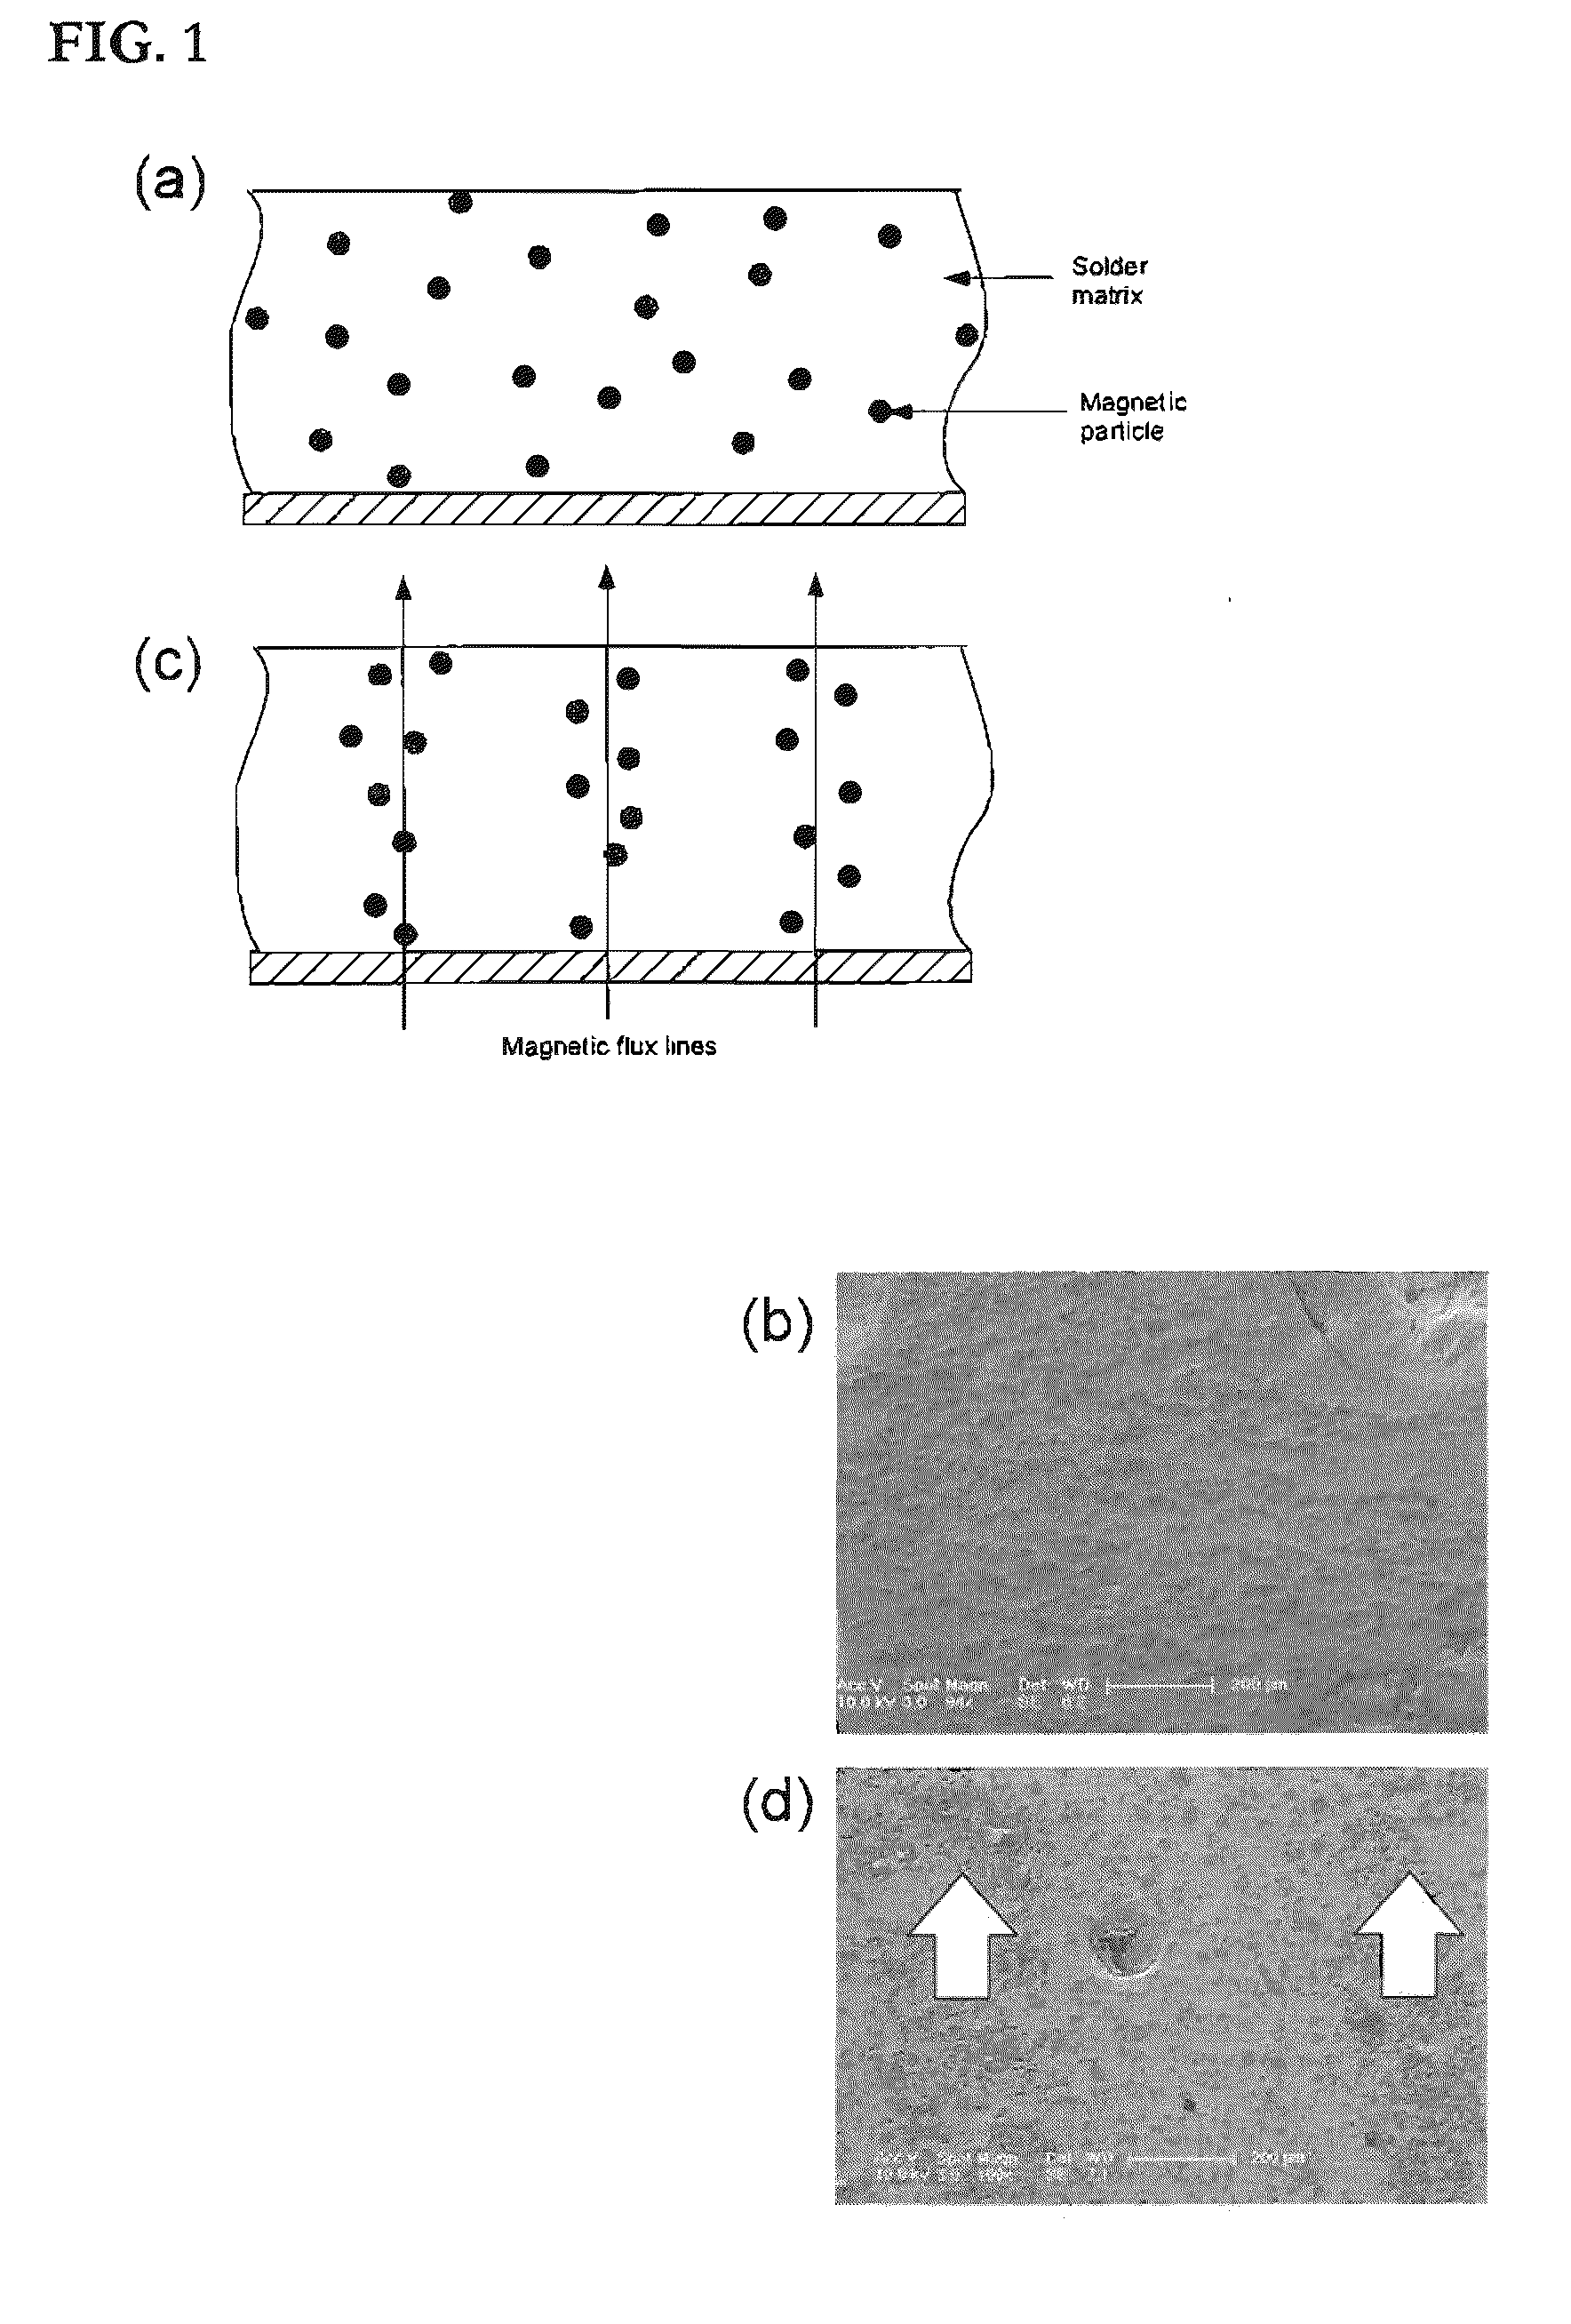 Low melting temperature alloys with magnetic dispersions